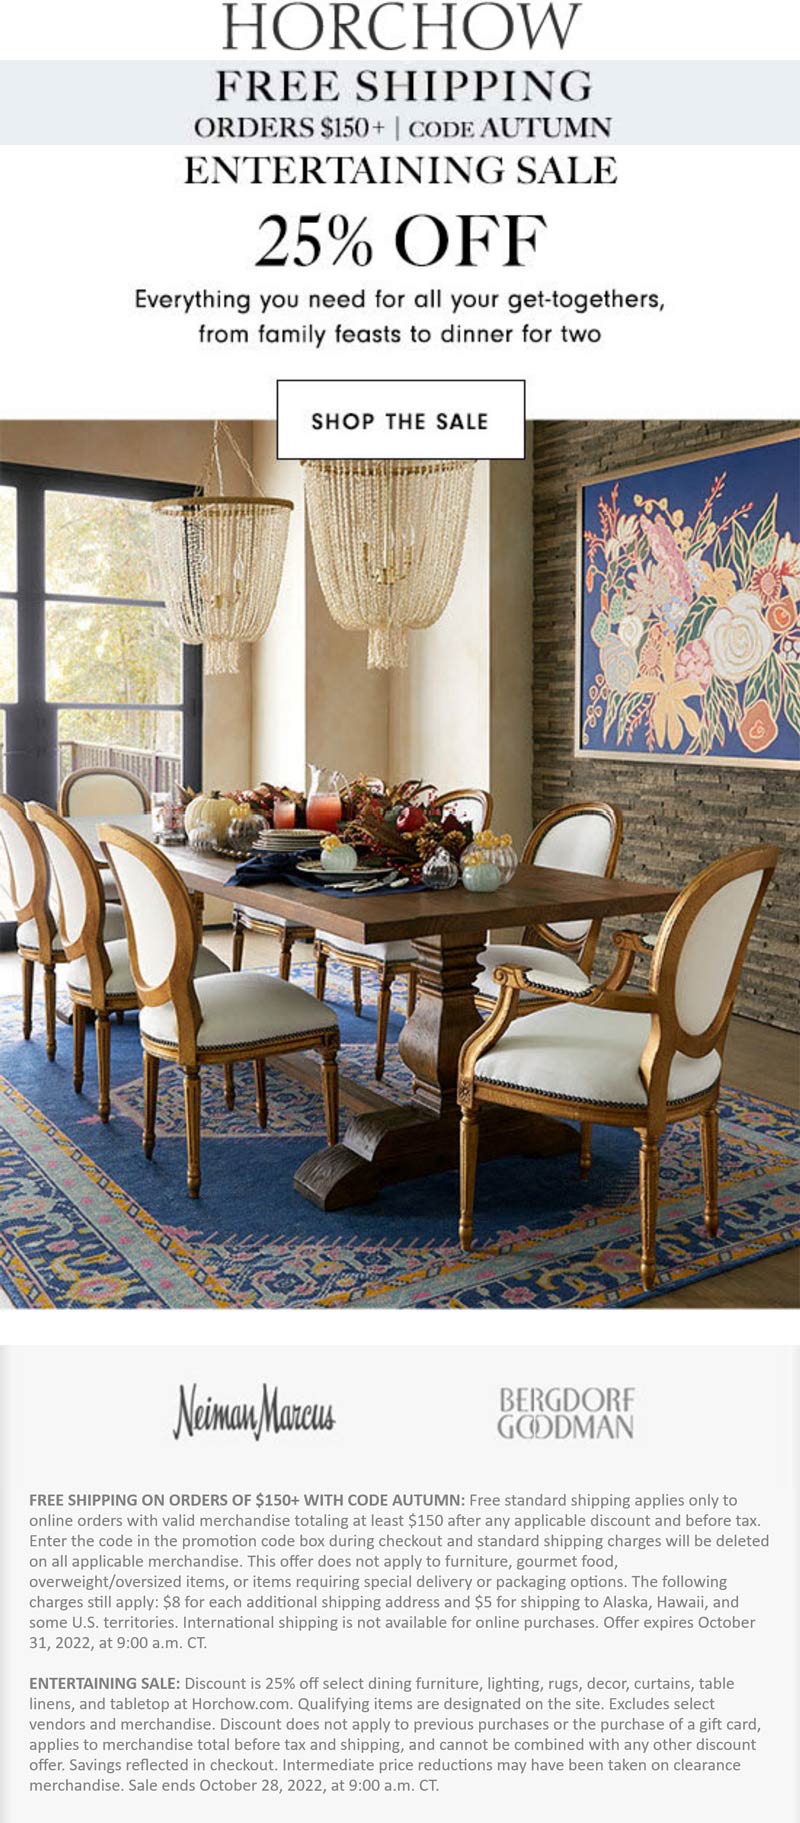 Horchow restaurants Coupon  25% off dining furniture, lighting & more at Horchow via promo code AUTUMN #horchow 